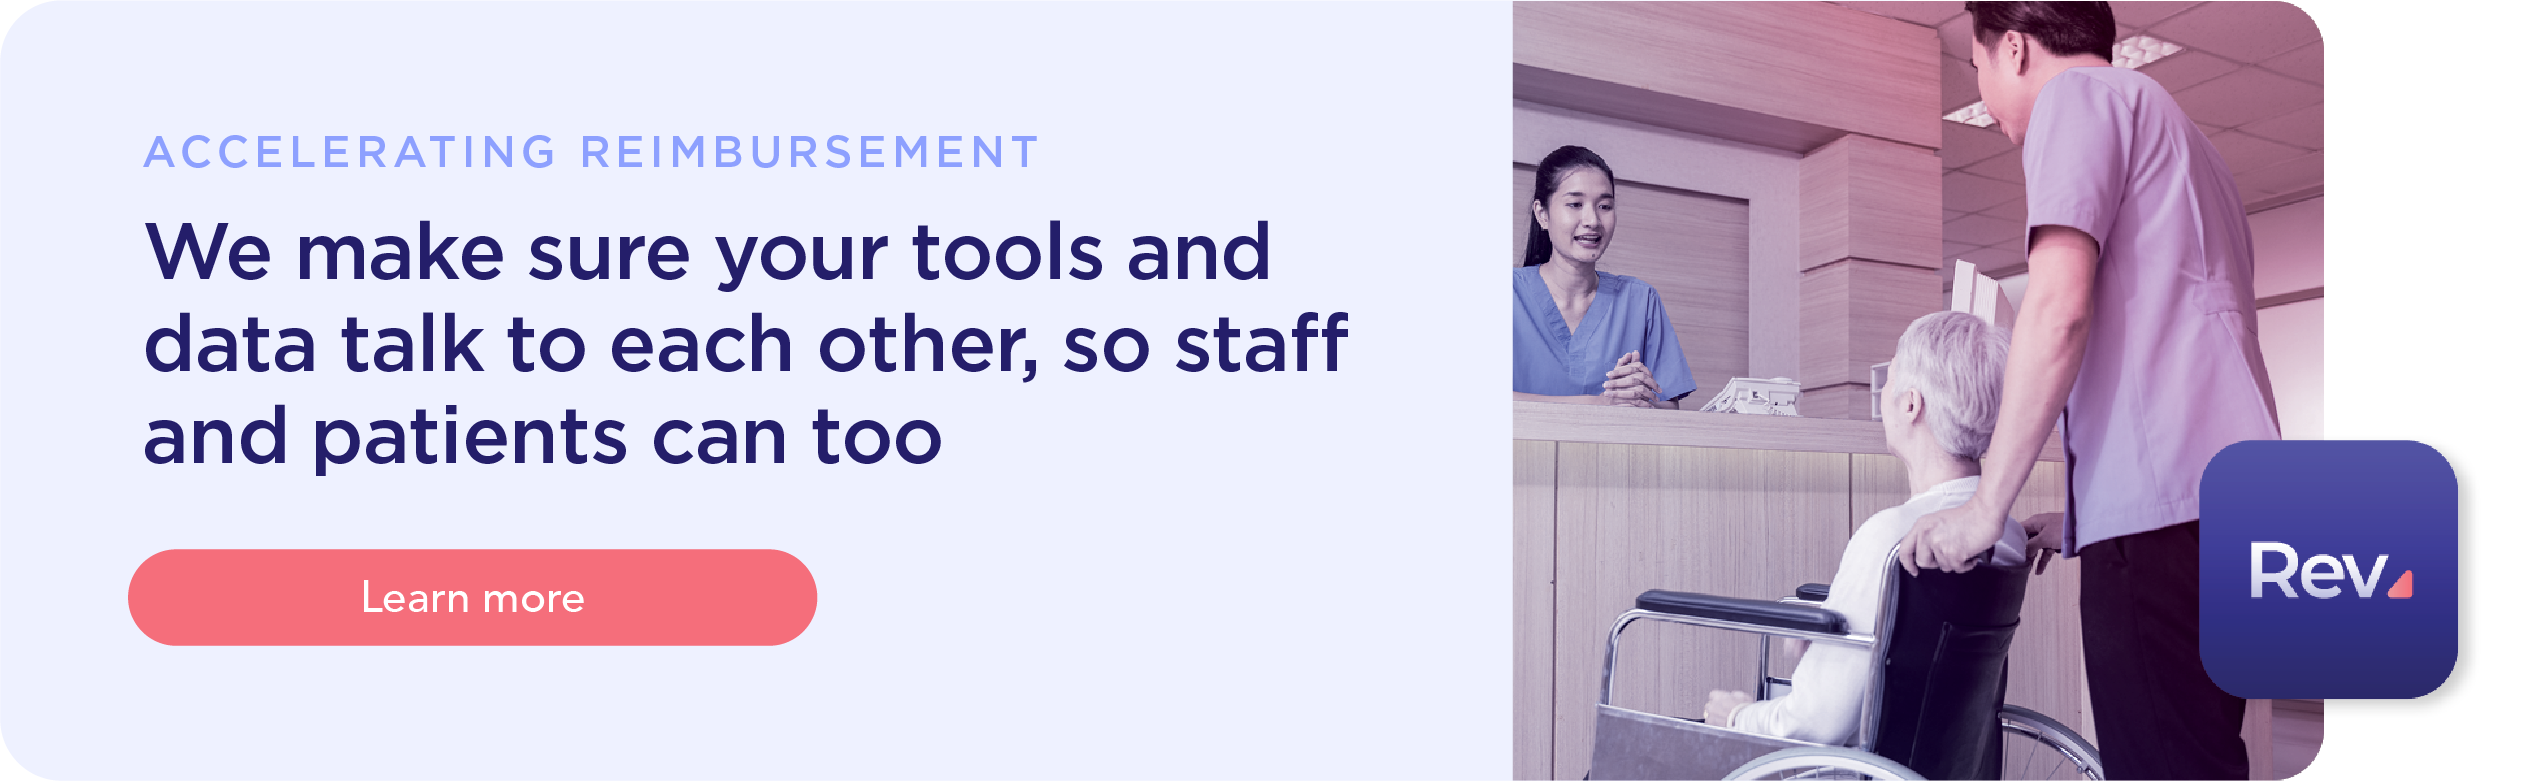 We make sure your tools and data talk to each other, so staff and patients can too. Learn more at our accelerating your reimbursements landing page.